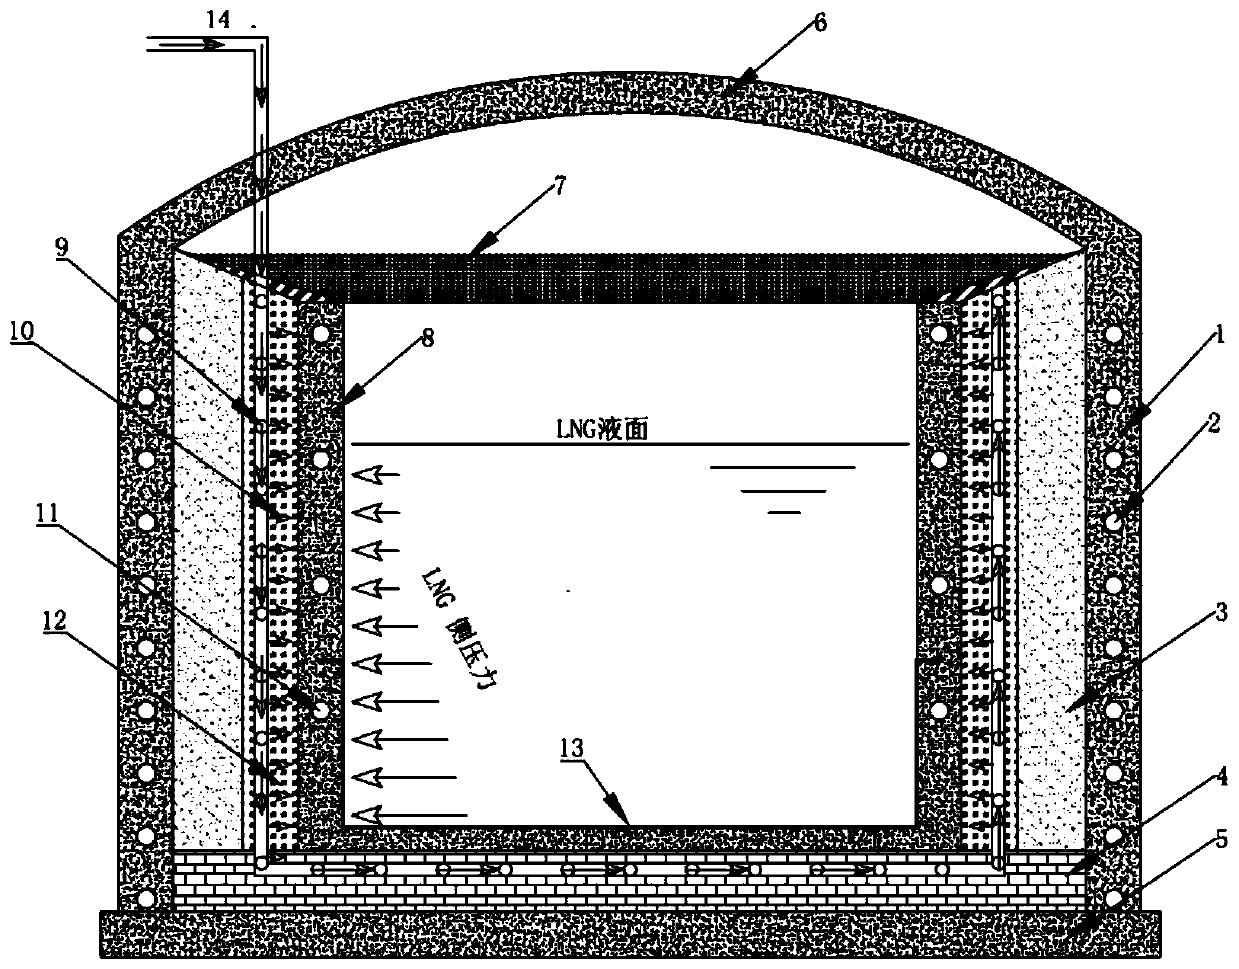 LNG storage tank and inner tank thereof